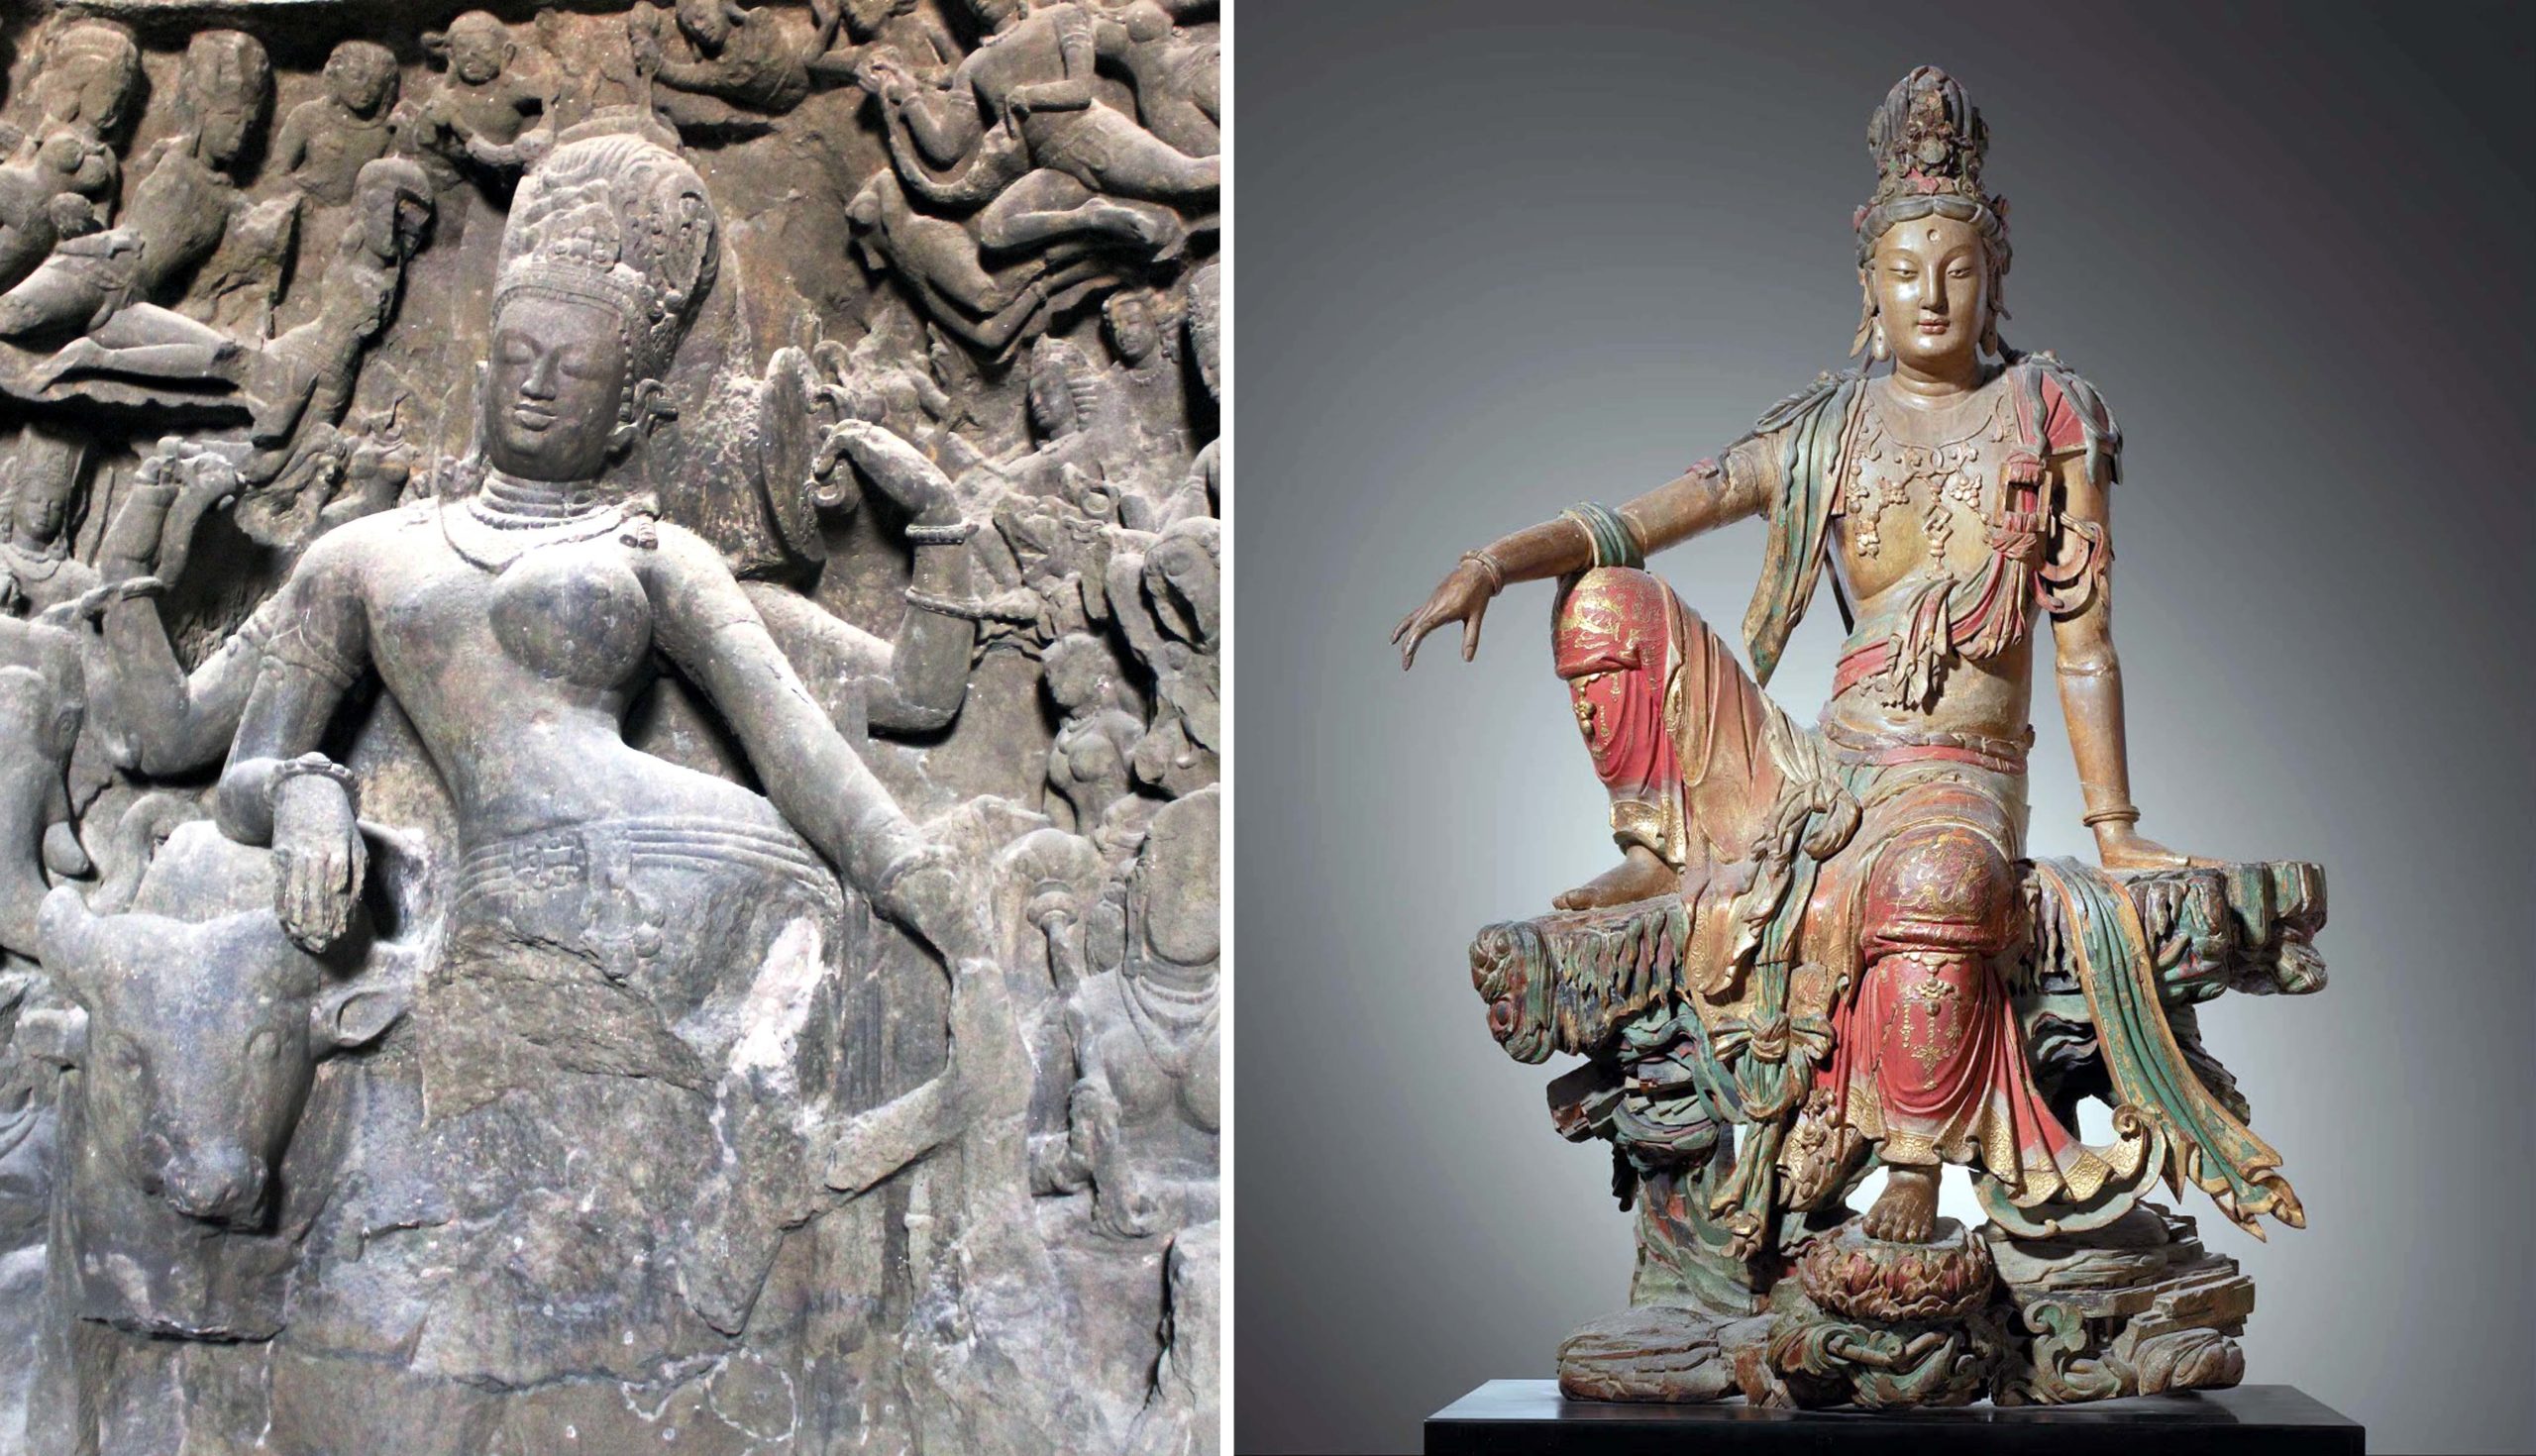 Left: Ardhanarishvara, relief sculpture from the Elephanta Caves, 5th–7th century C.E., Mumbai, India (photo: Isabell Schulz, CC BY-SA 2.0); Guanyin of the Southern Sea, China, 11th/12th century, Lio (907–1125) or Jin Dynasty (1115–1234), polychromed wood (Nelson-Atkins Museum of Art)